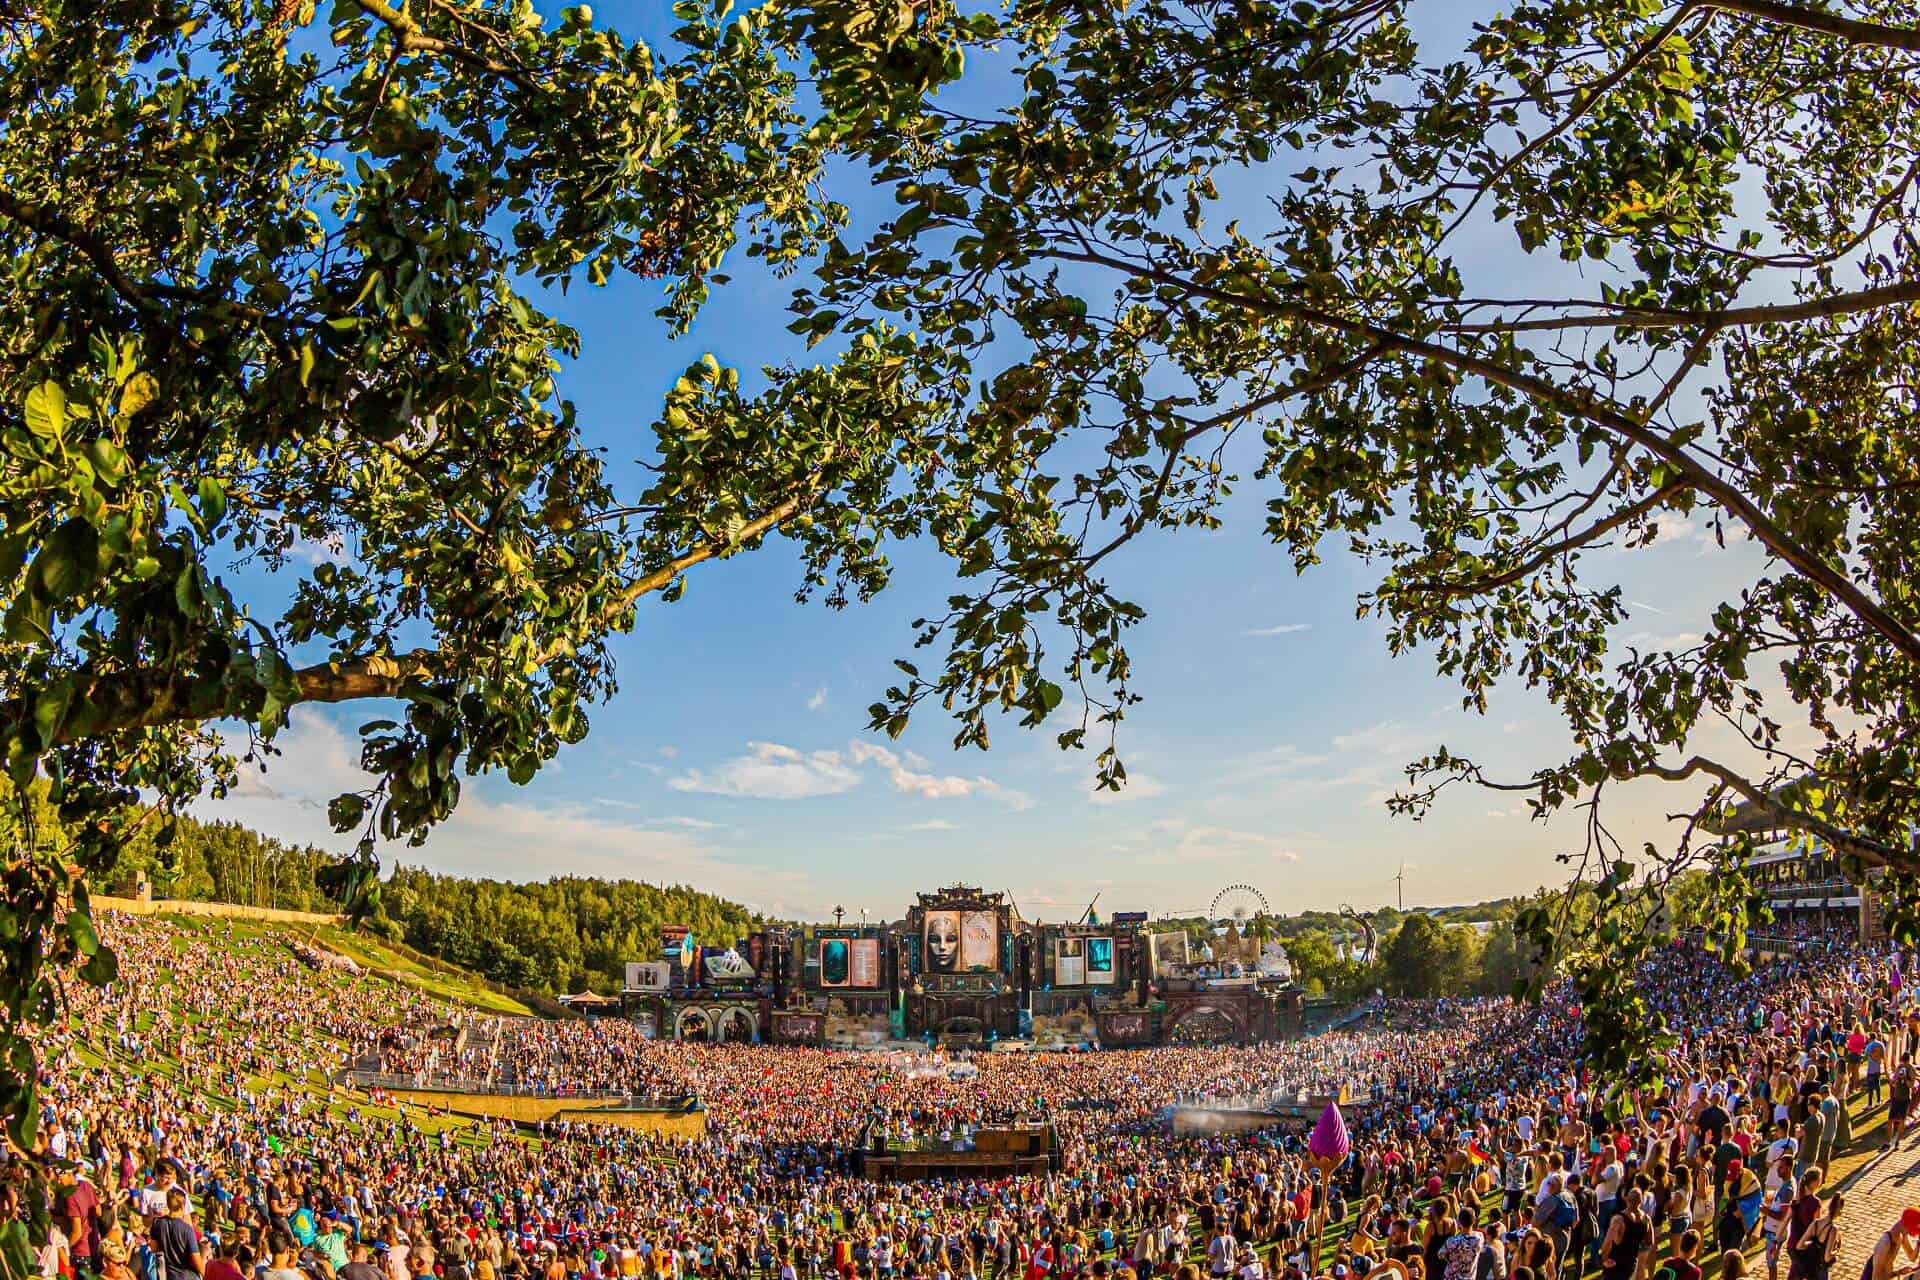 Tomorrowland’s ‘United Through Music’ to feature Adam Beyer, Carl Cox, & more